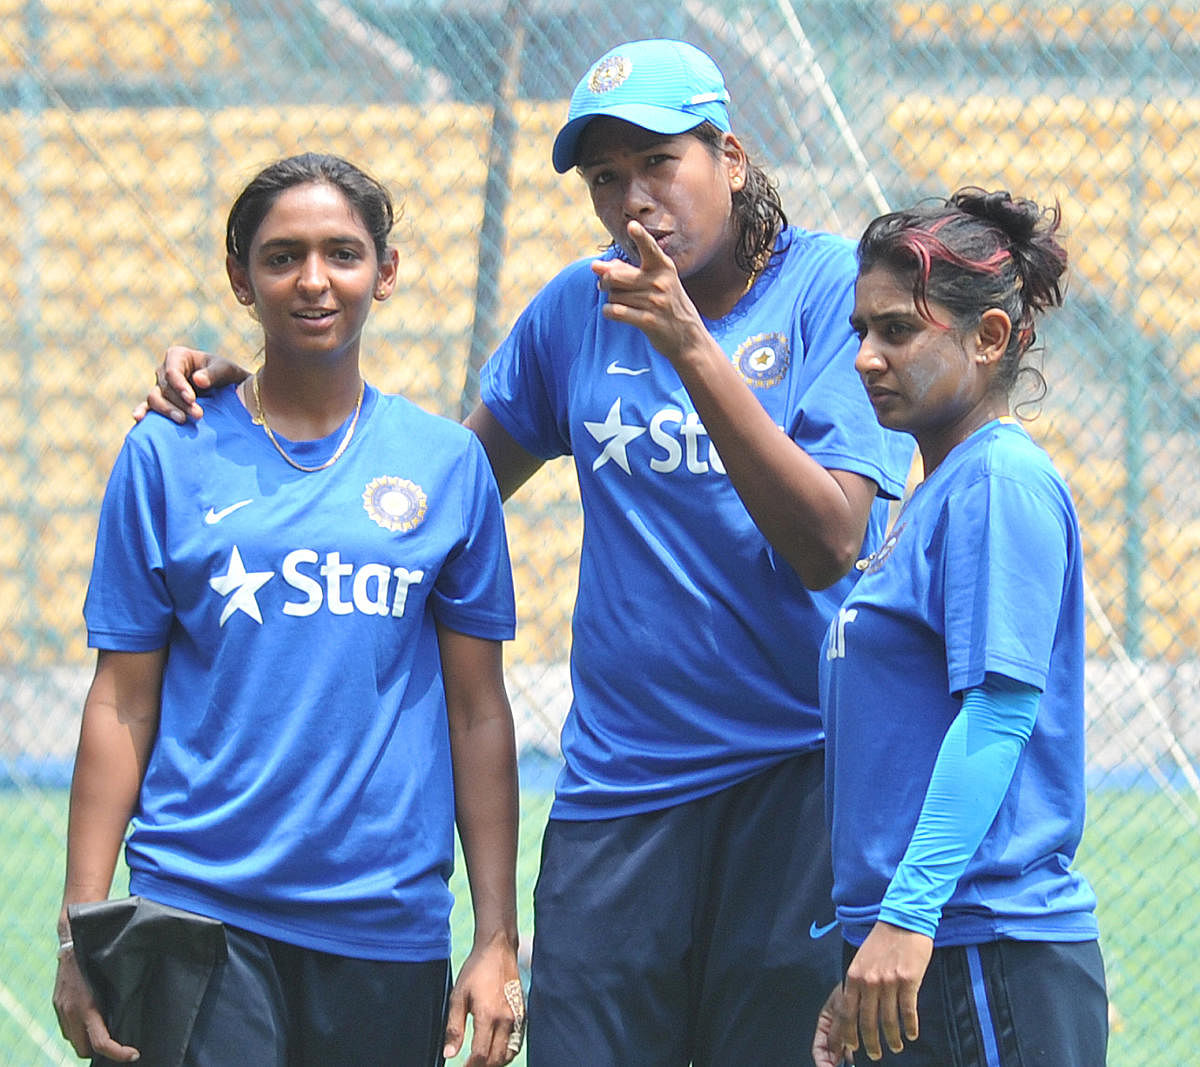 Harmanpreet Kaur (left) and Mithali Rai (right) were the captains of the two teams that played an exhibition T20 match during the IPL last year. DH File Photo